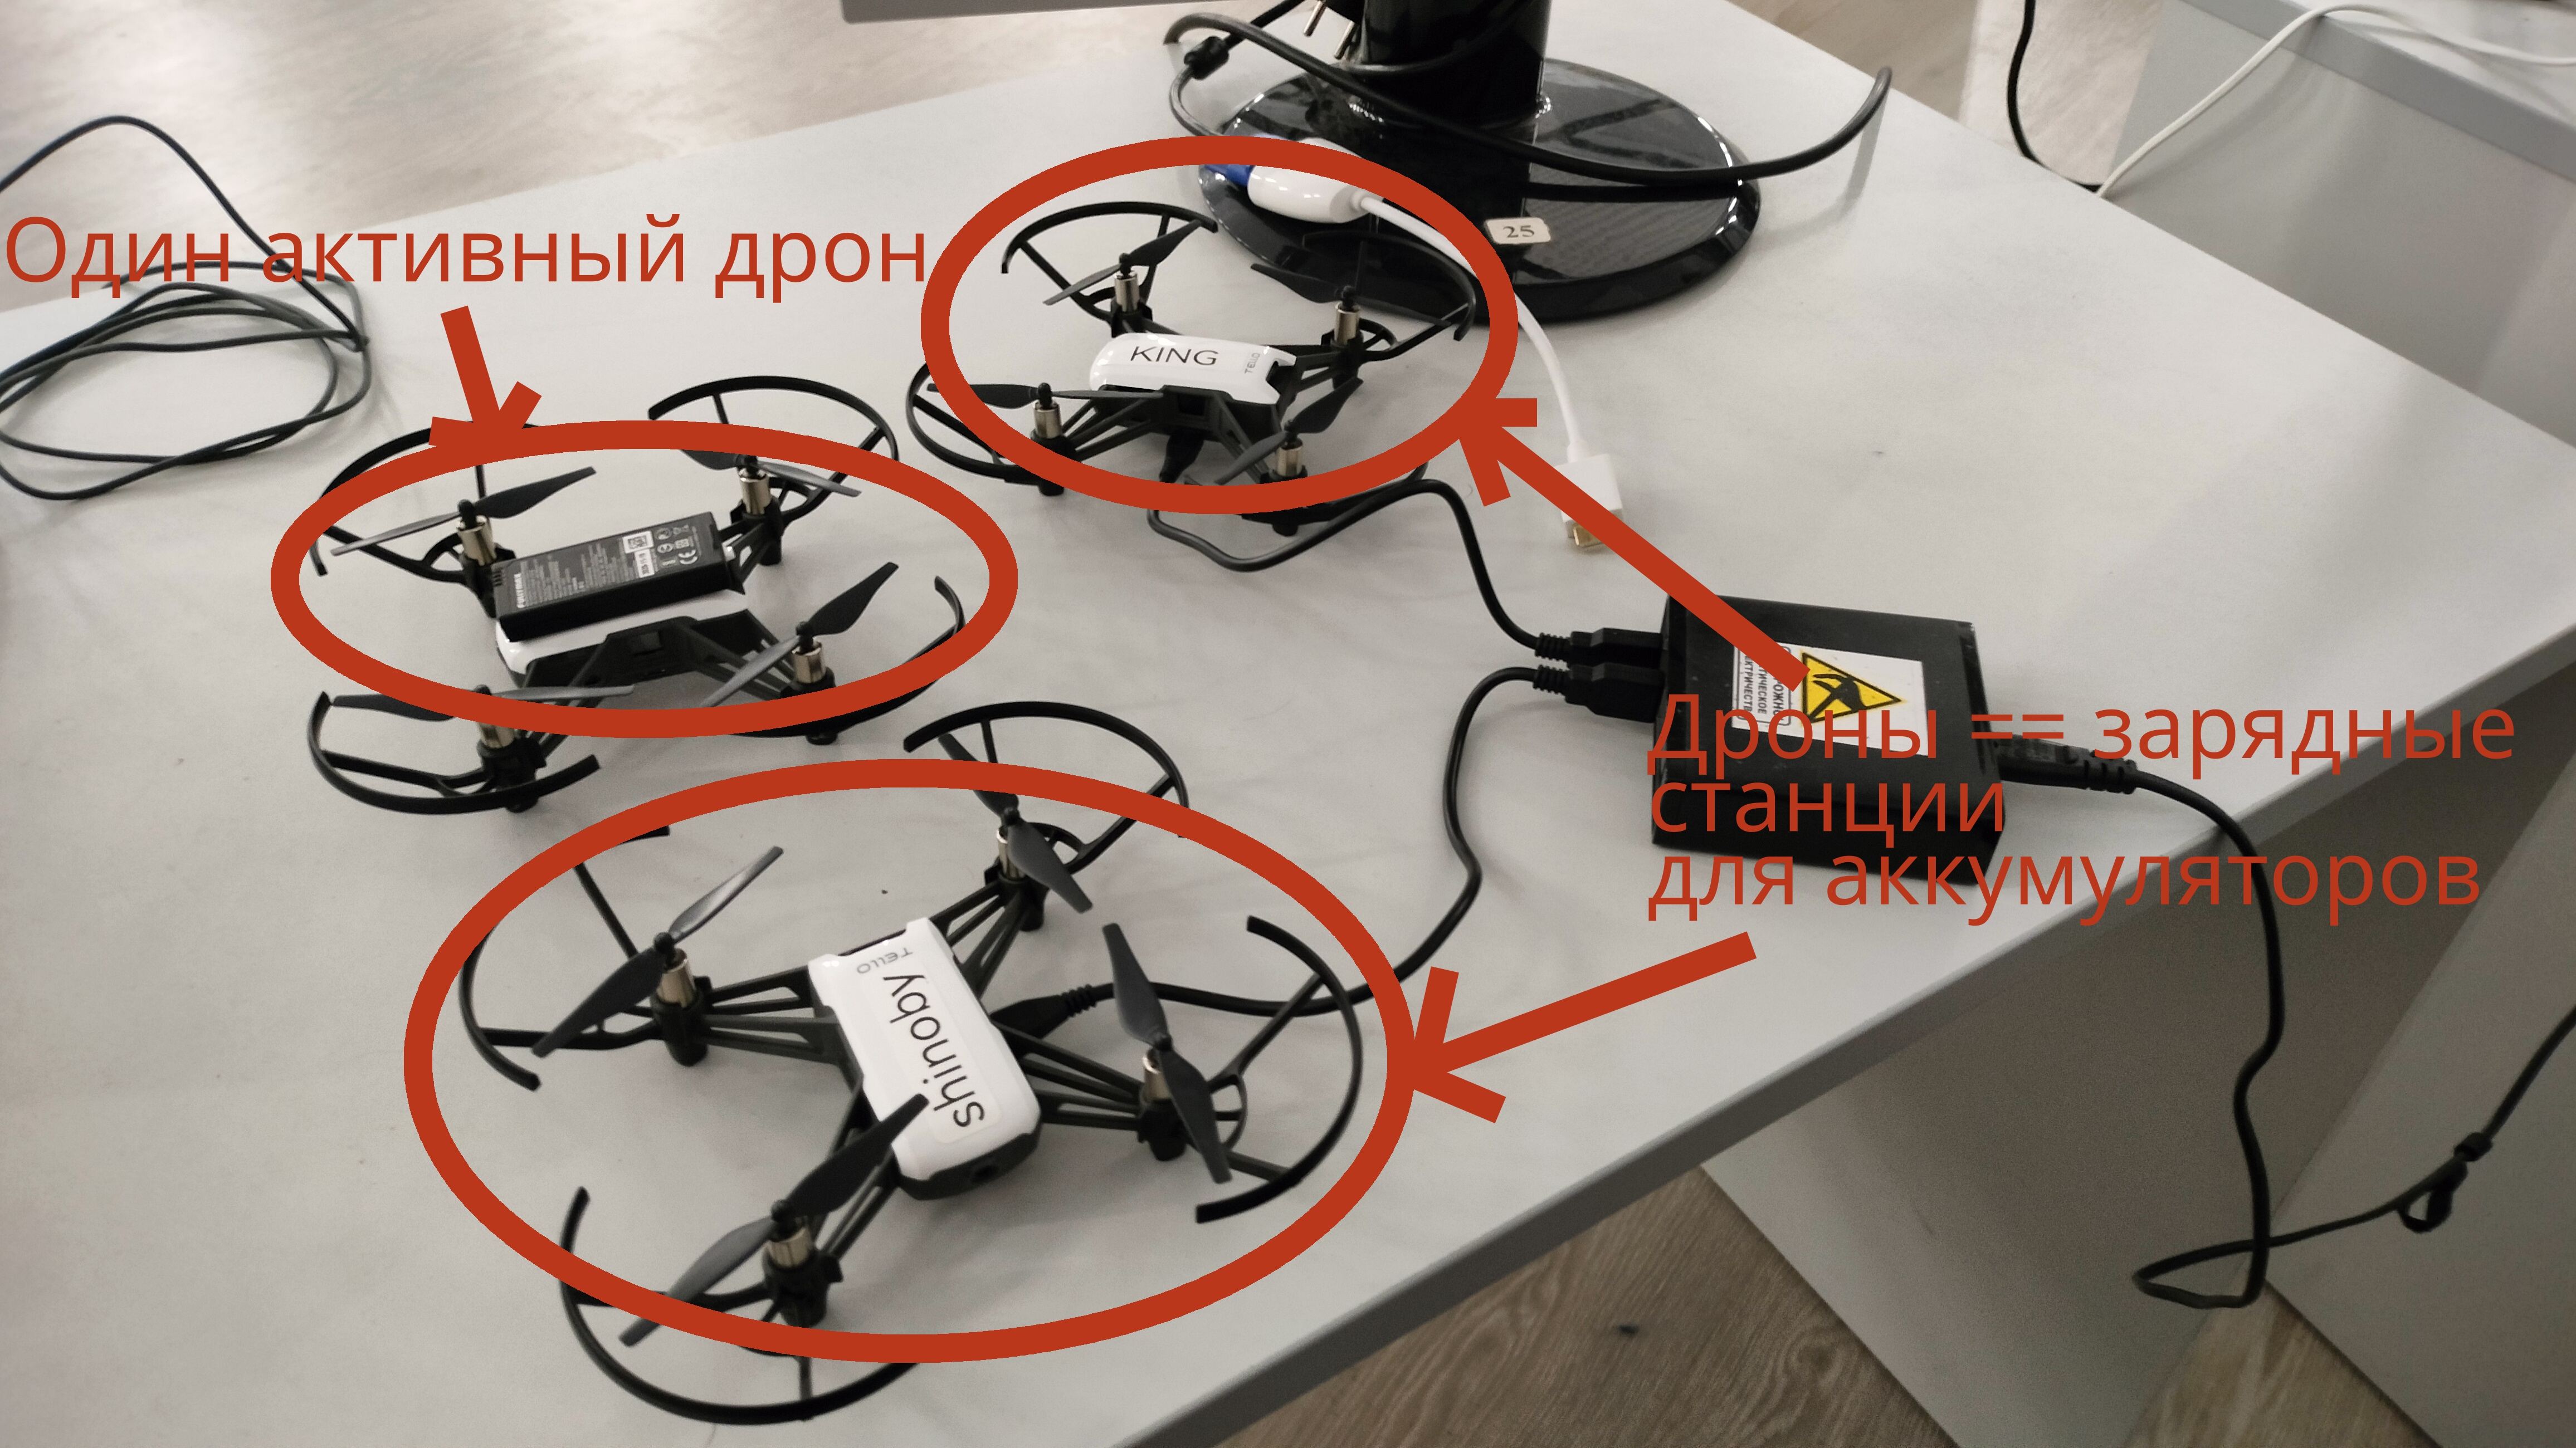 autolab:drones_charging_stations.jpg